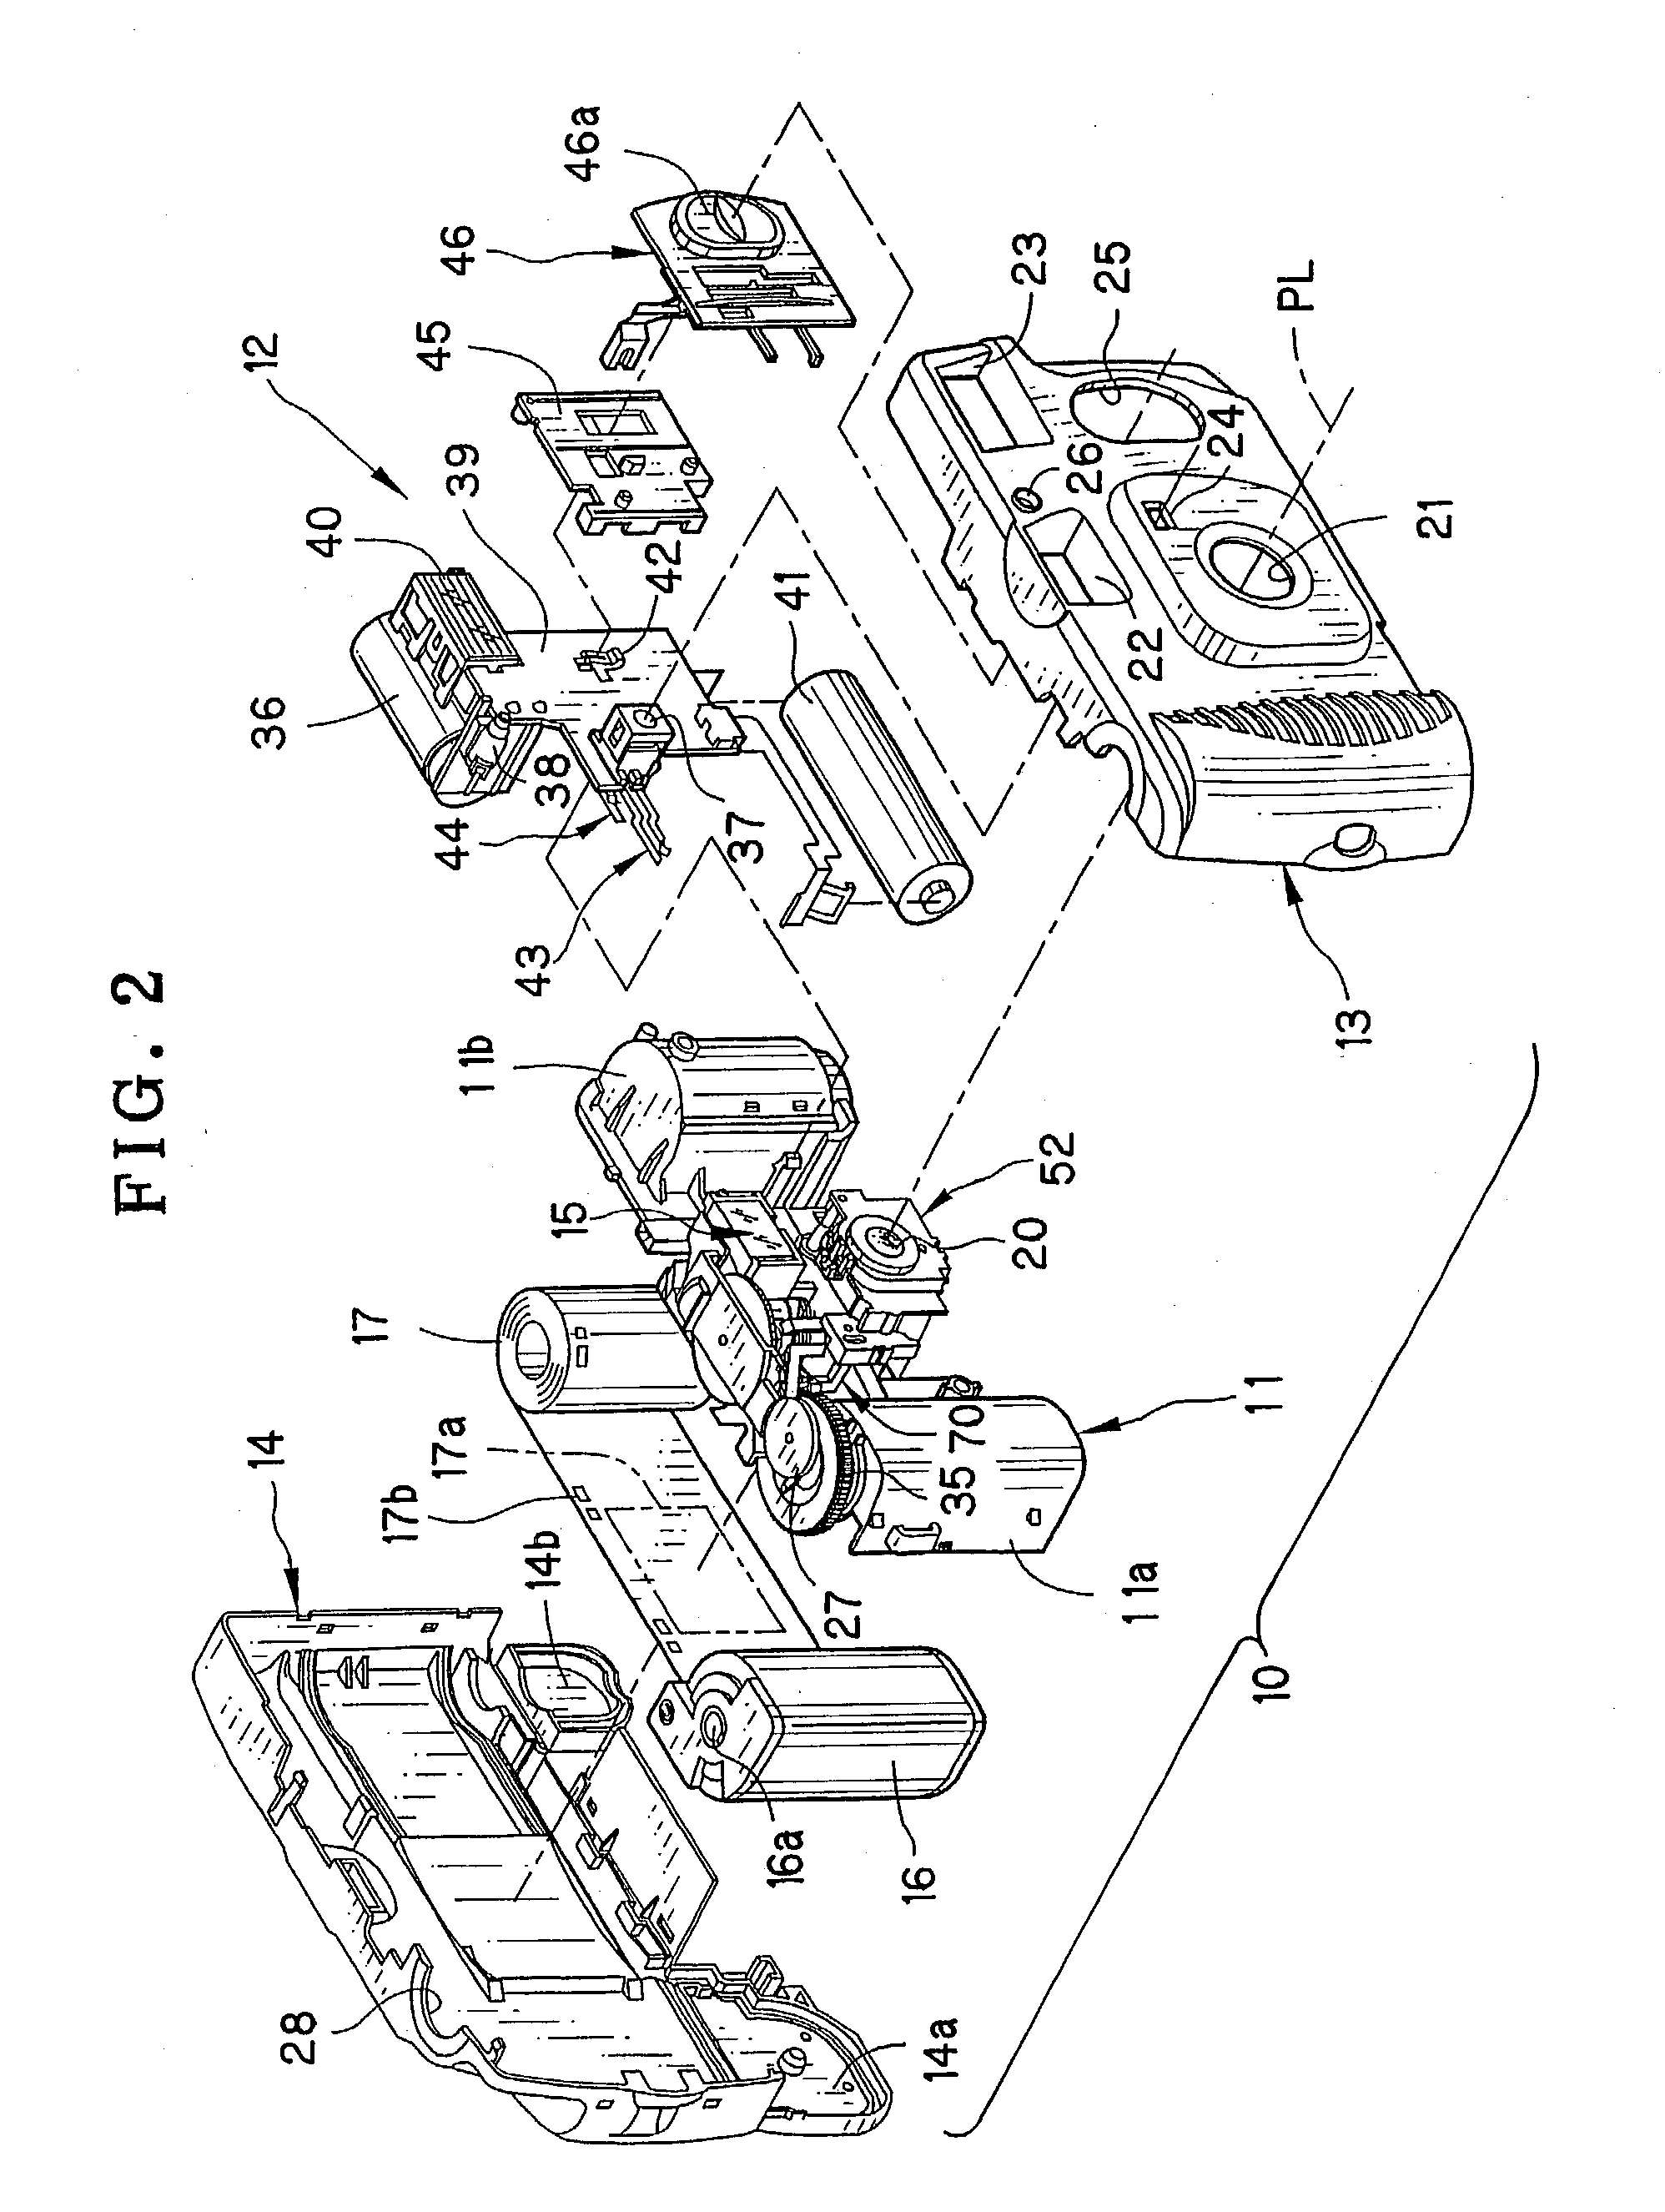 Camera and shutter device